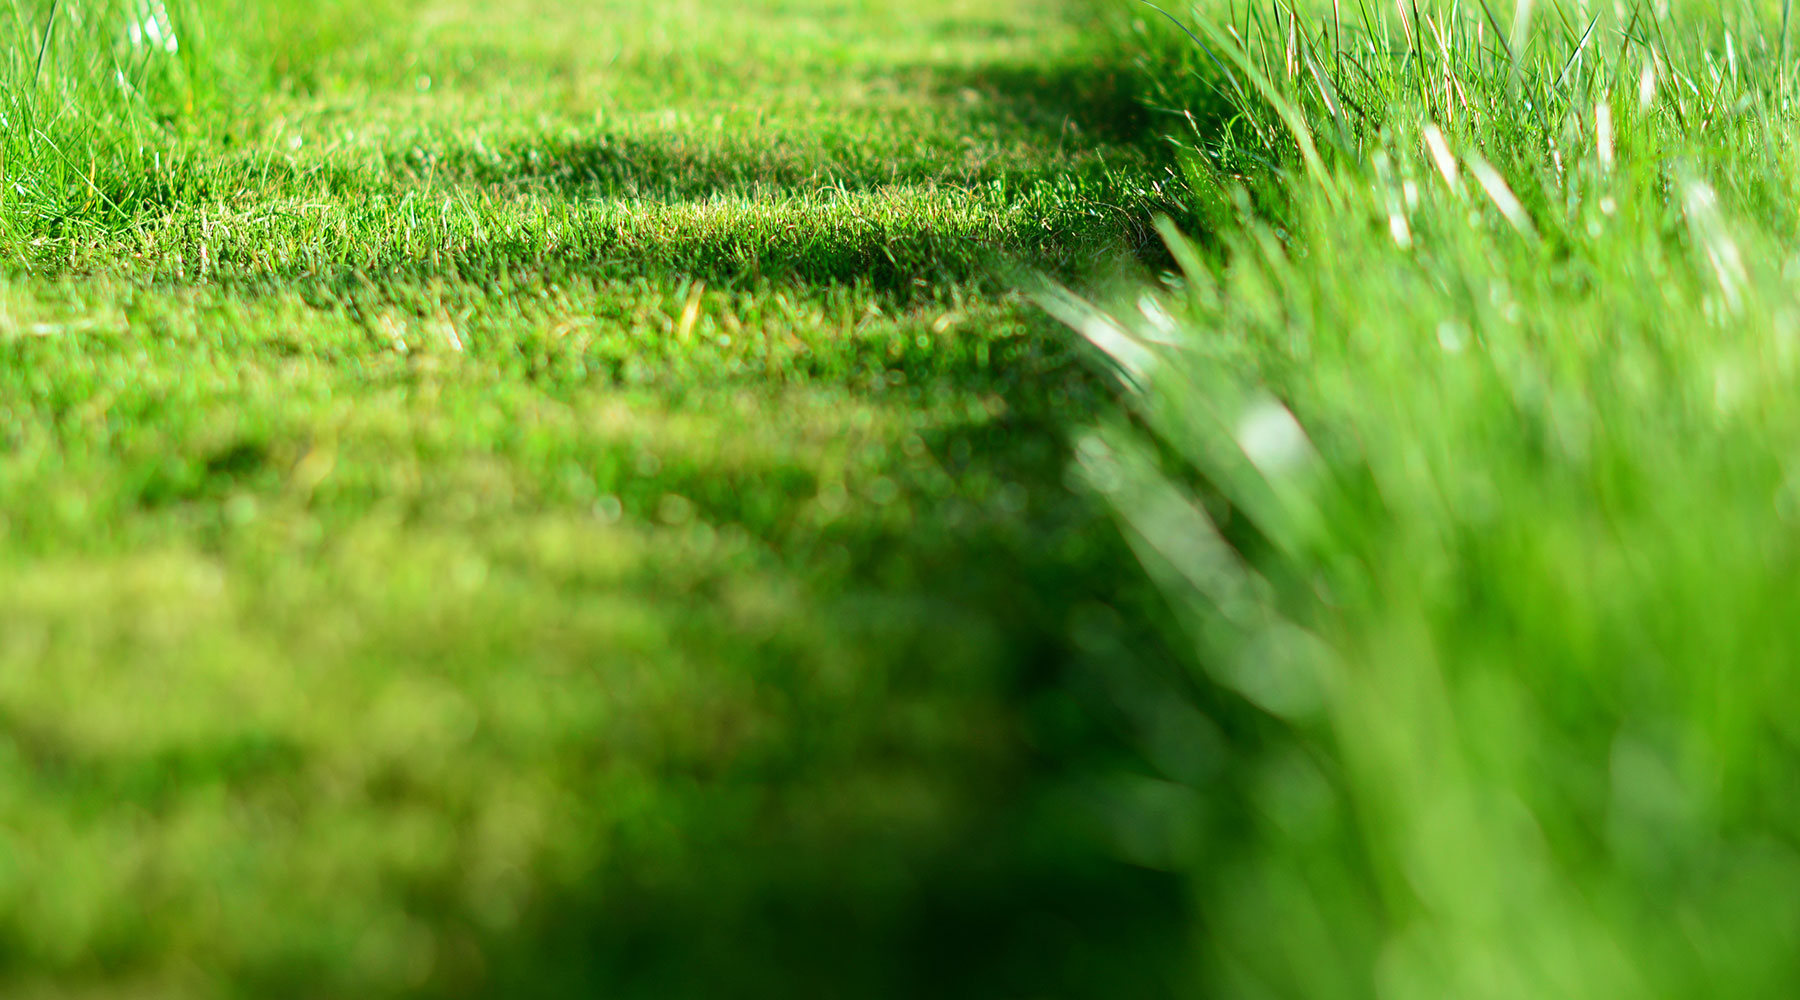 Mower City Albury | Our top mowing tips for a beautiful lawn.